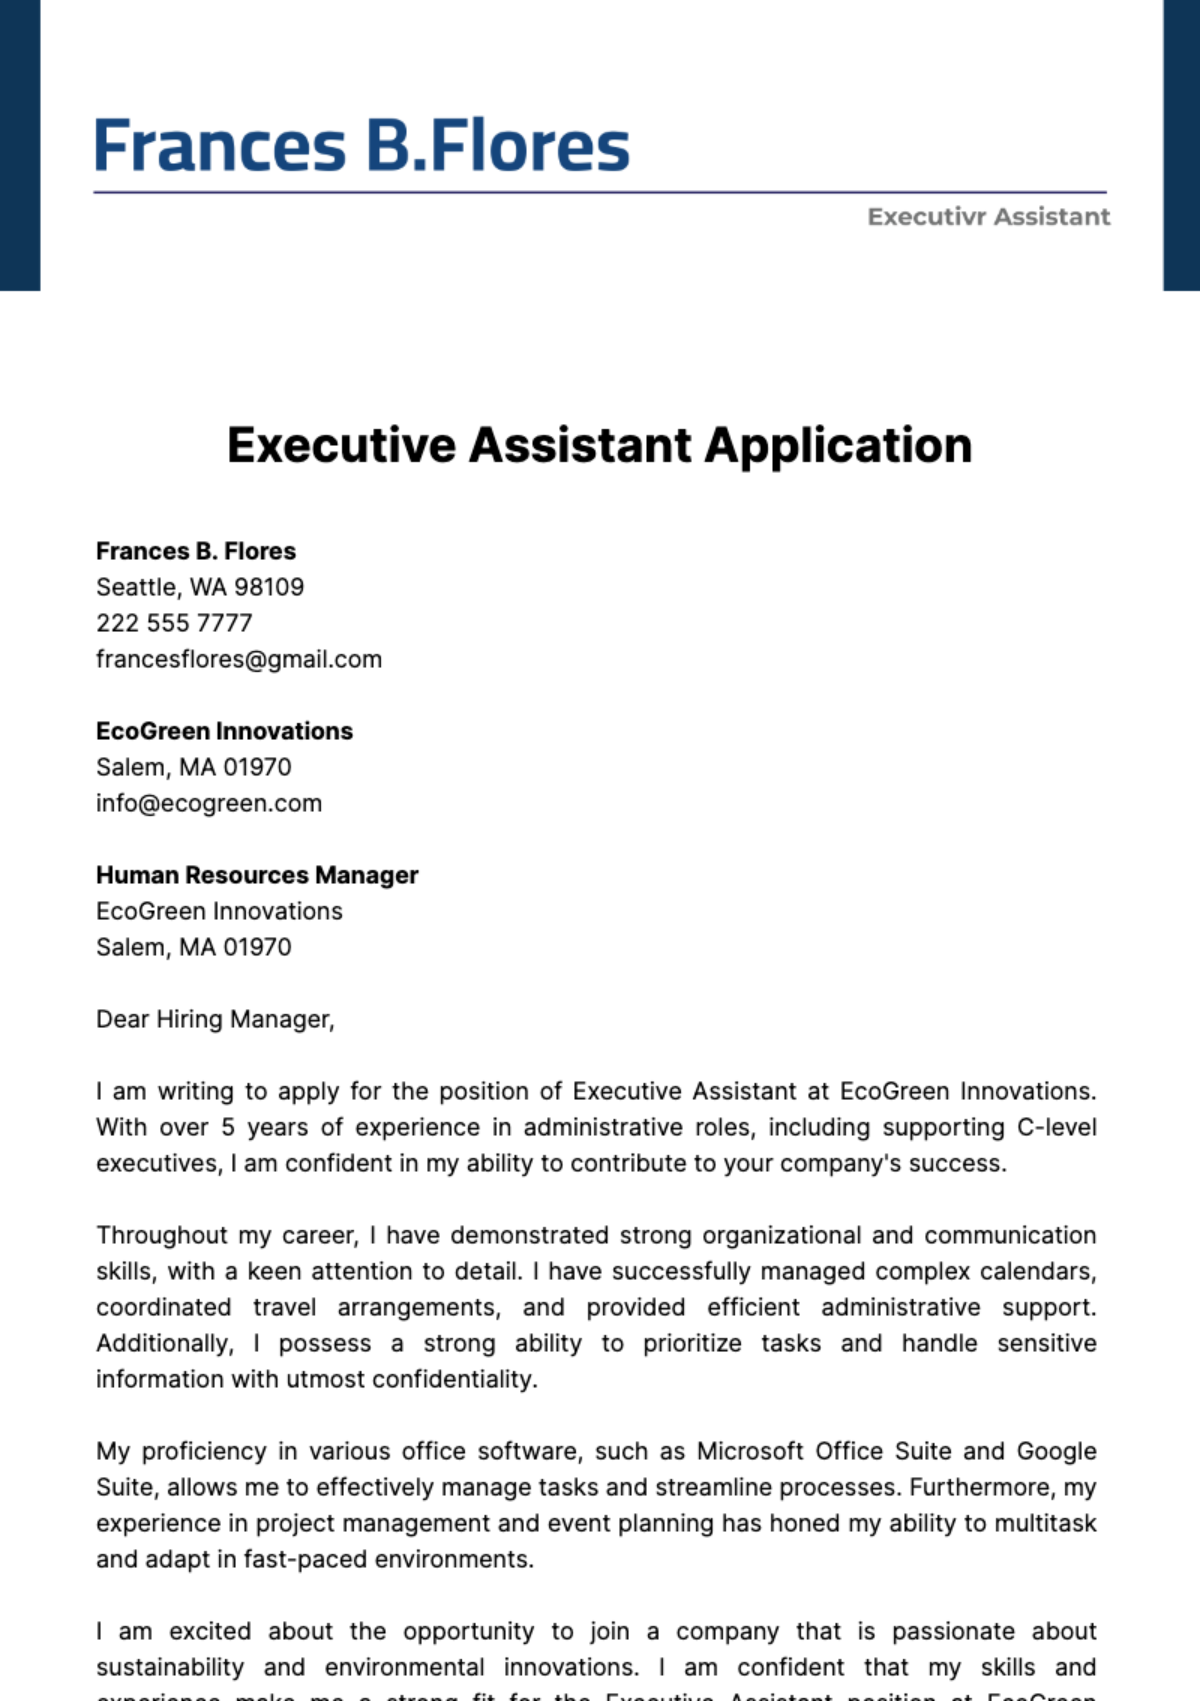 Executive Assistant Cover Letter  Template